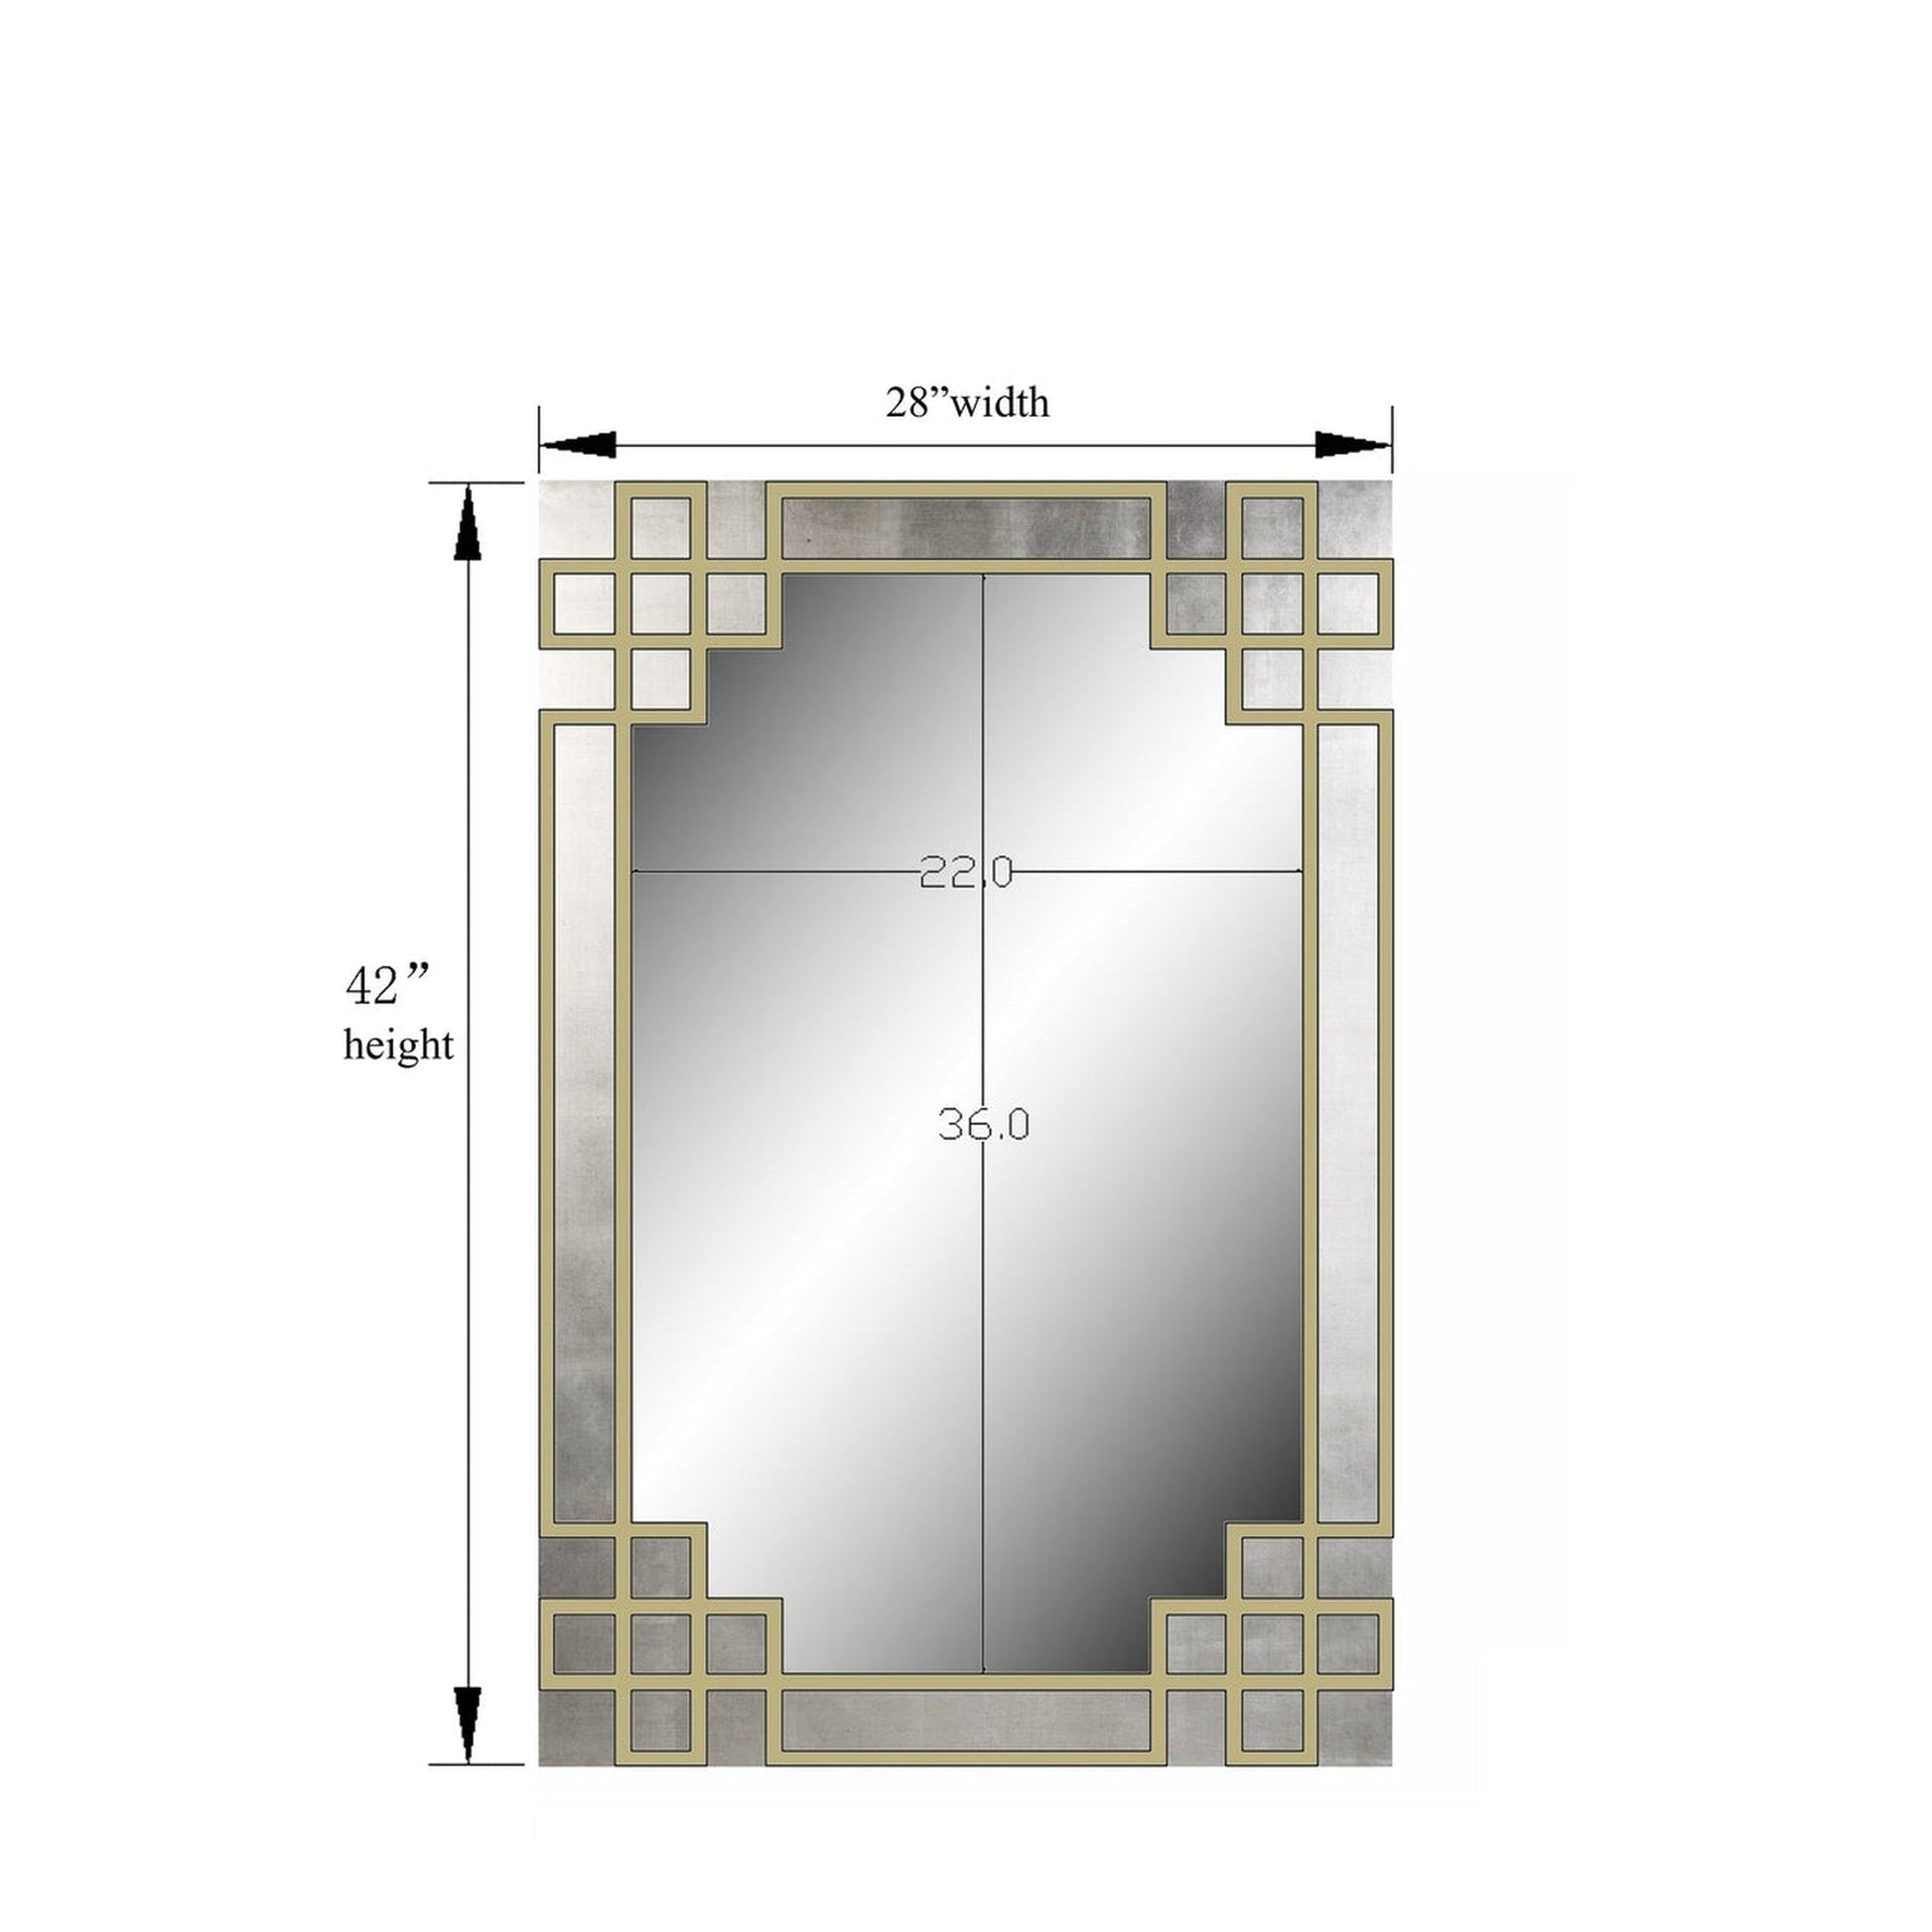 SBC Decor Elegant 28" x 42" Wall-Mounted Wood Frame Dresser Mirror In White with Gold Leaf Iron Overlay Finish